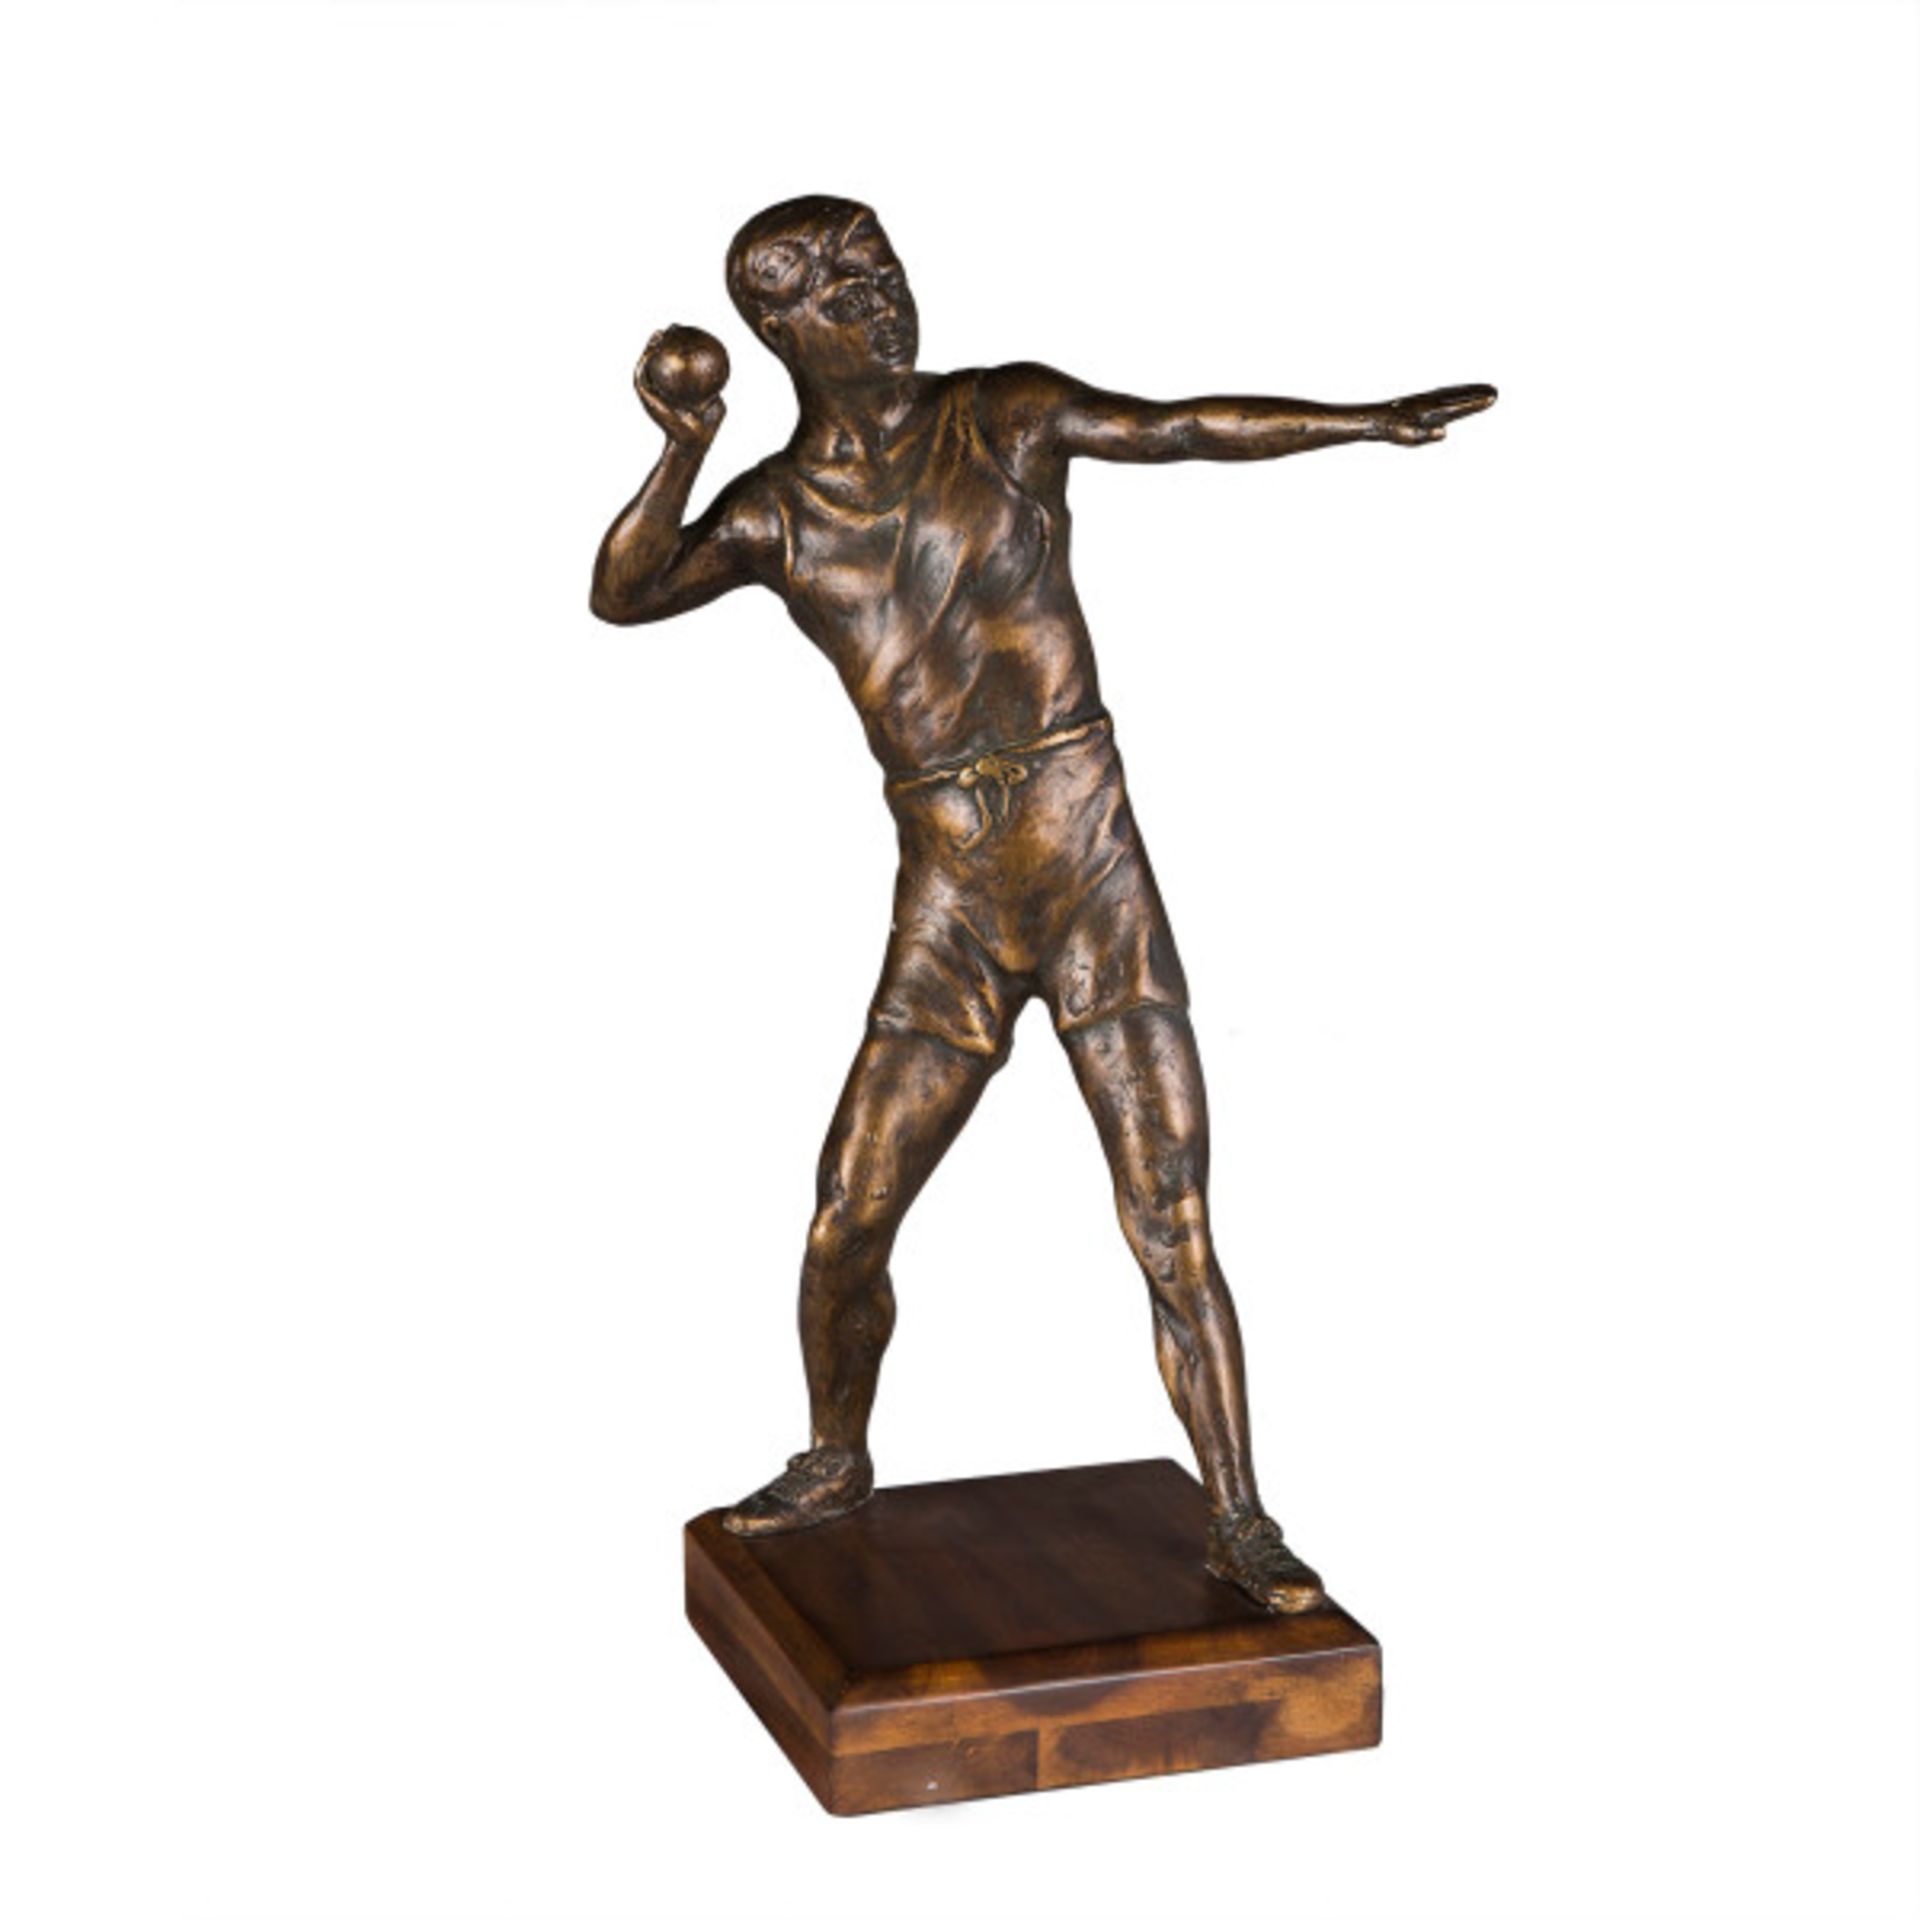 Bronzed Resin Large Sport Man Rs-01 carton dimensions 27 x 27 x 52cm Maison 55 designs reflect the - Image 2 of 2